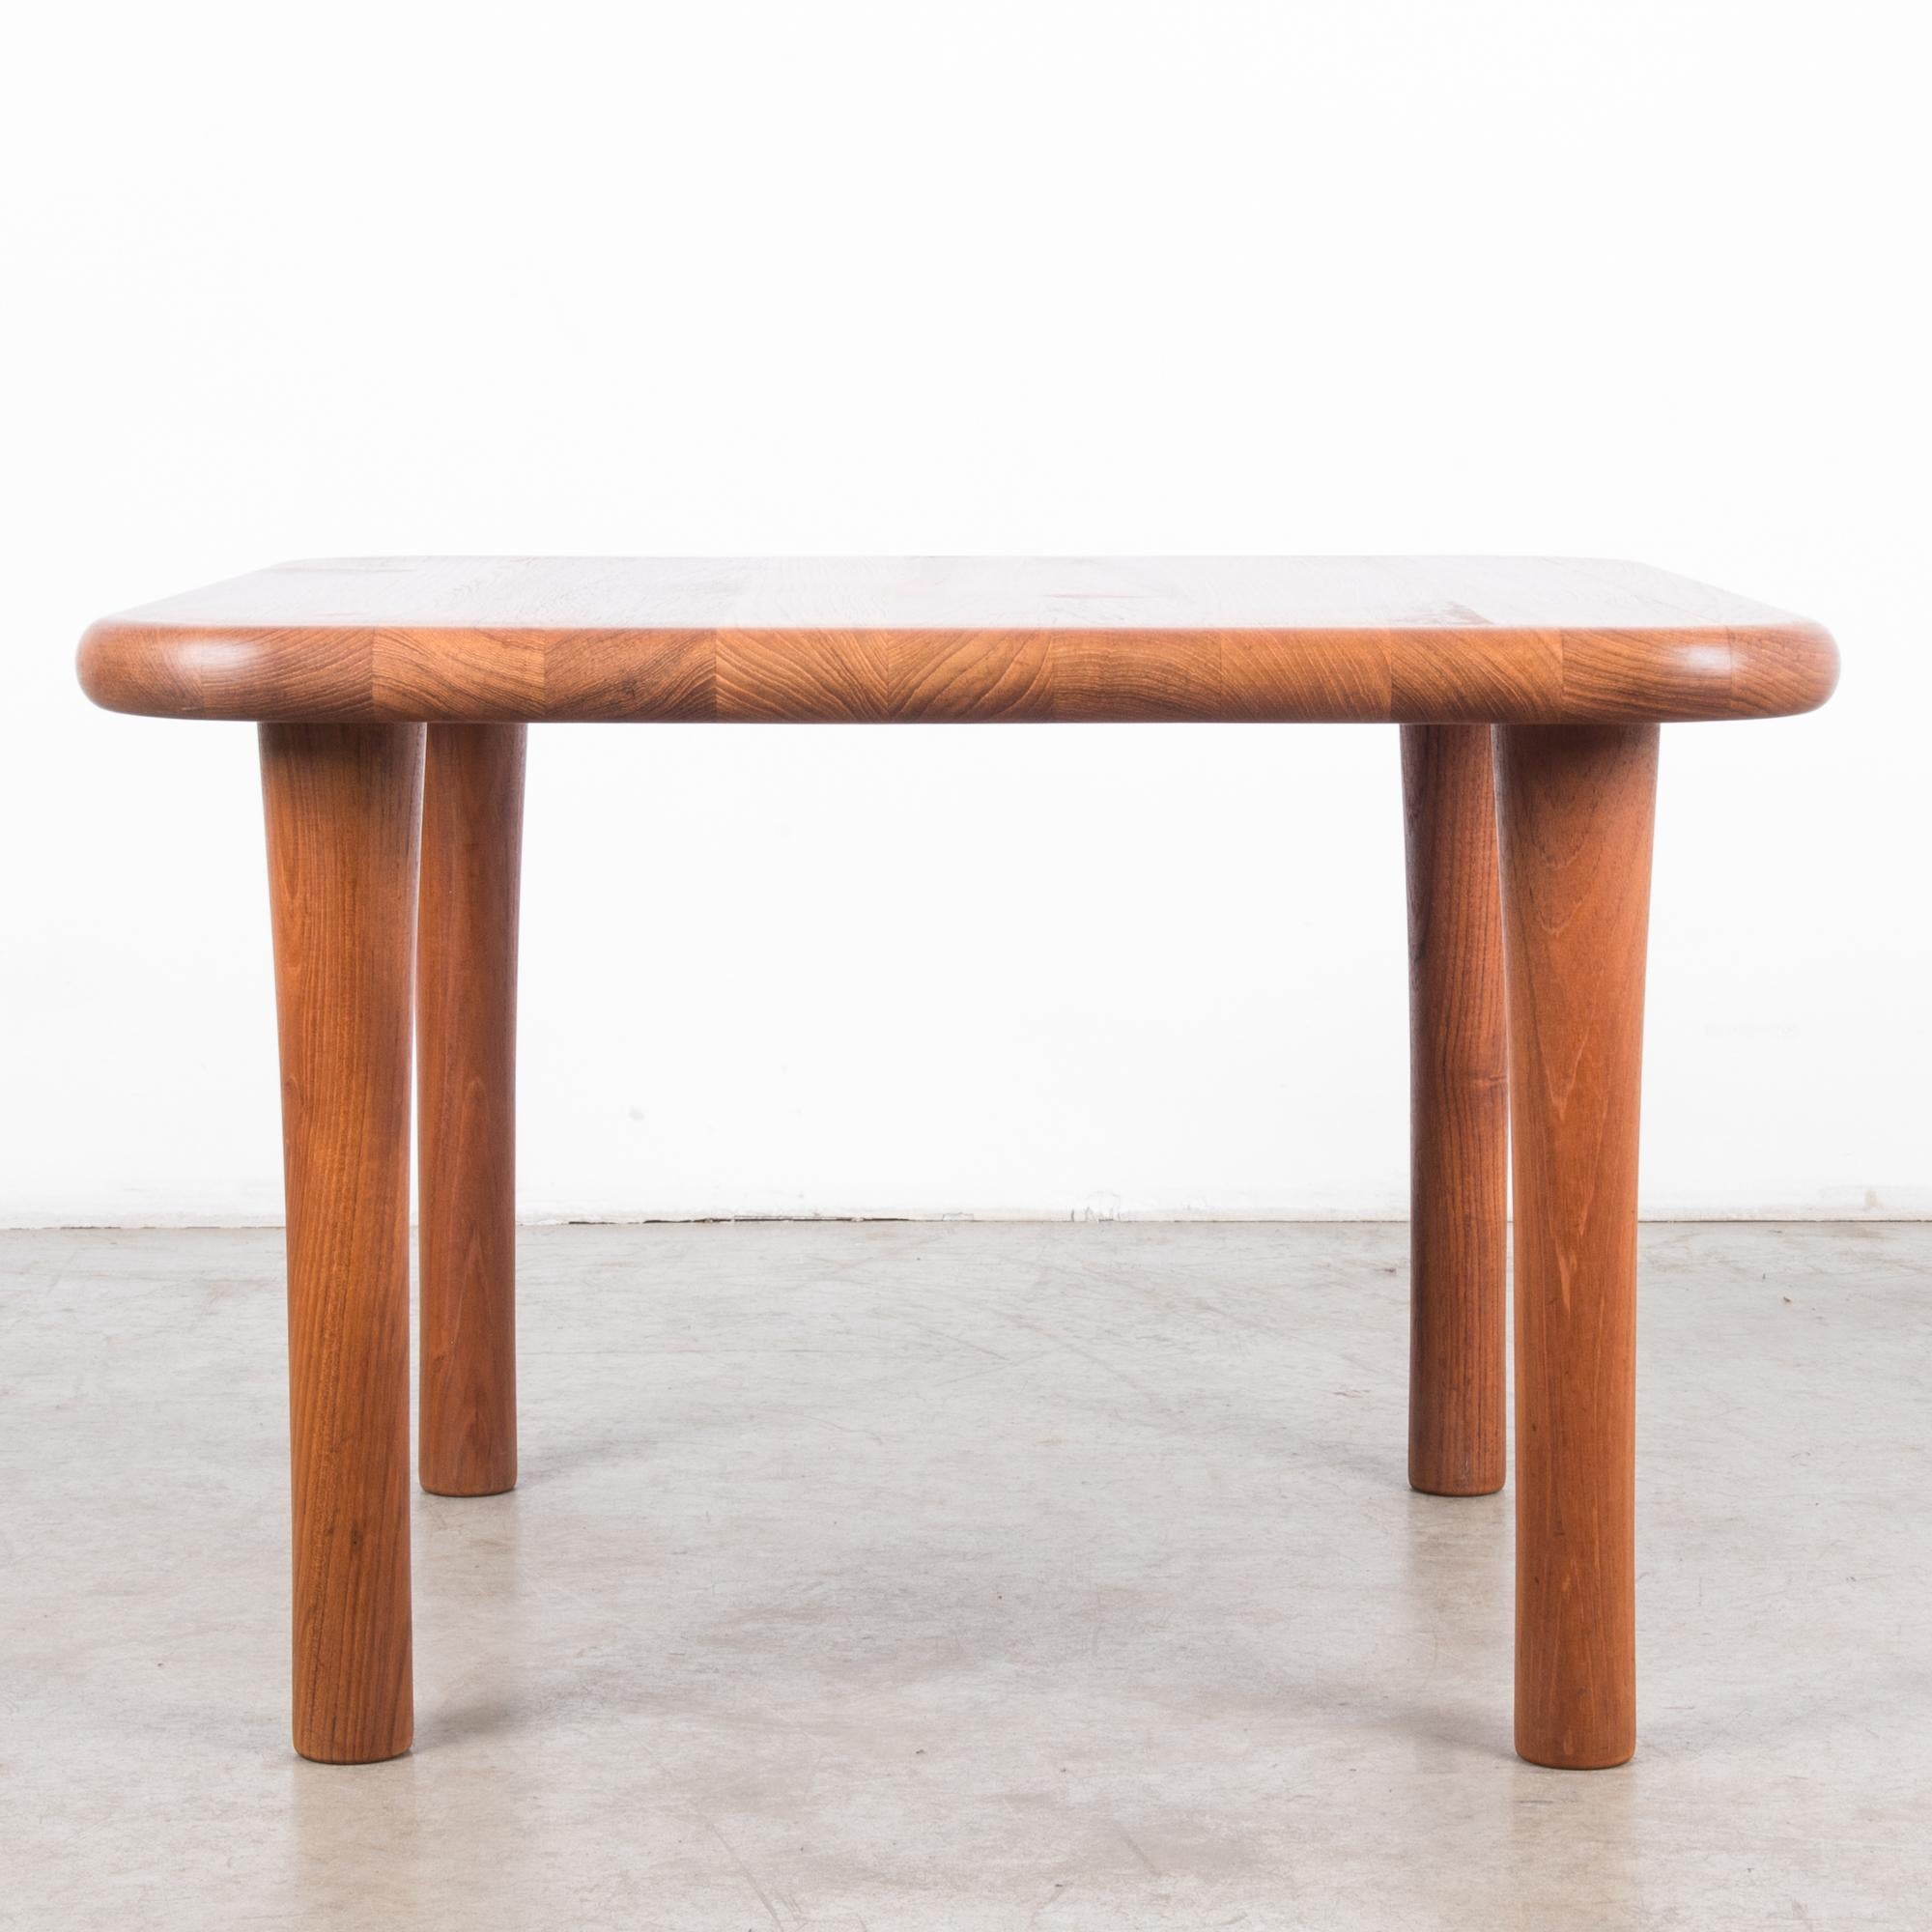 A wooden coffee table from Denmark, circa 1980. A square tabletop rests upon four cylindrical legs, which taper inwards only to flare out at the feet, giving the table a bold and distinctive posture. The corners of the tabletop are broad curves; the